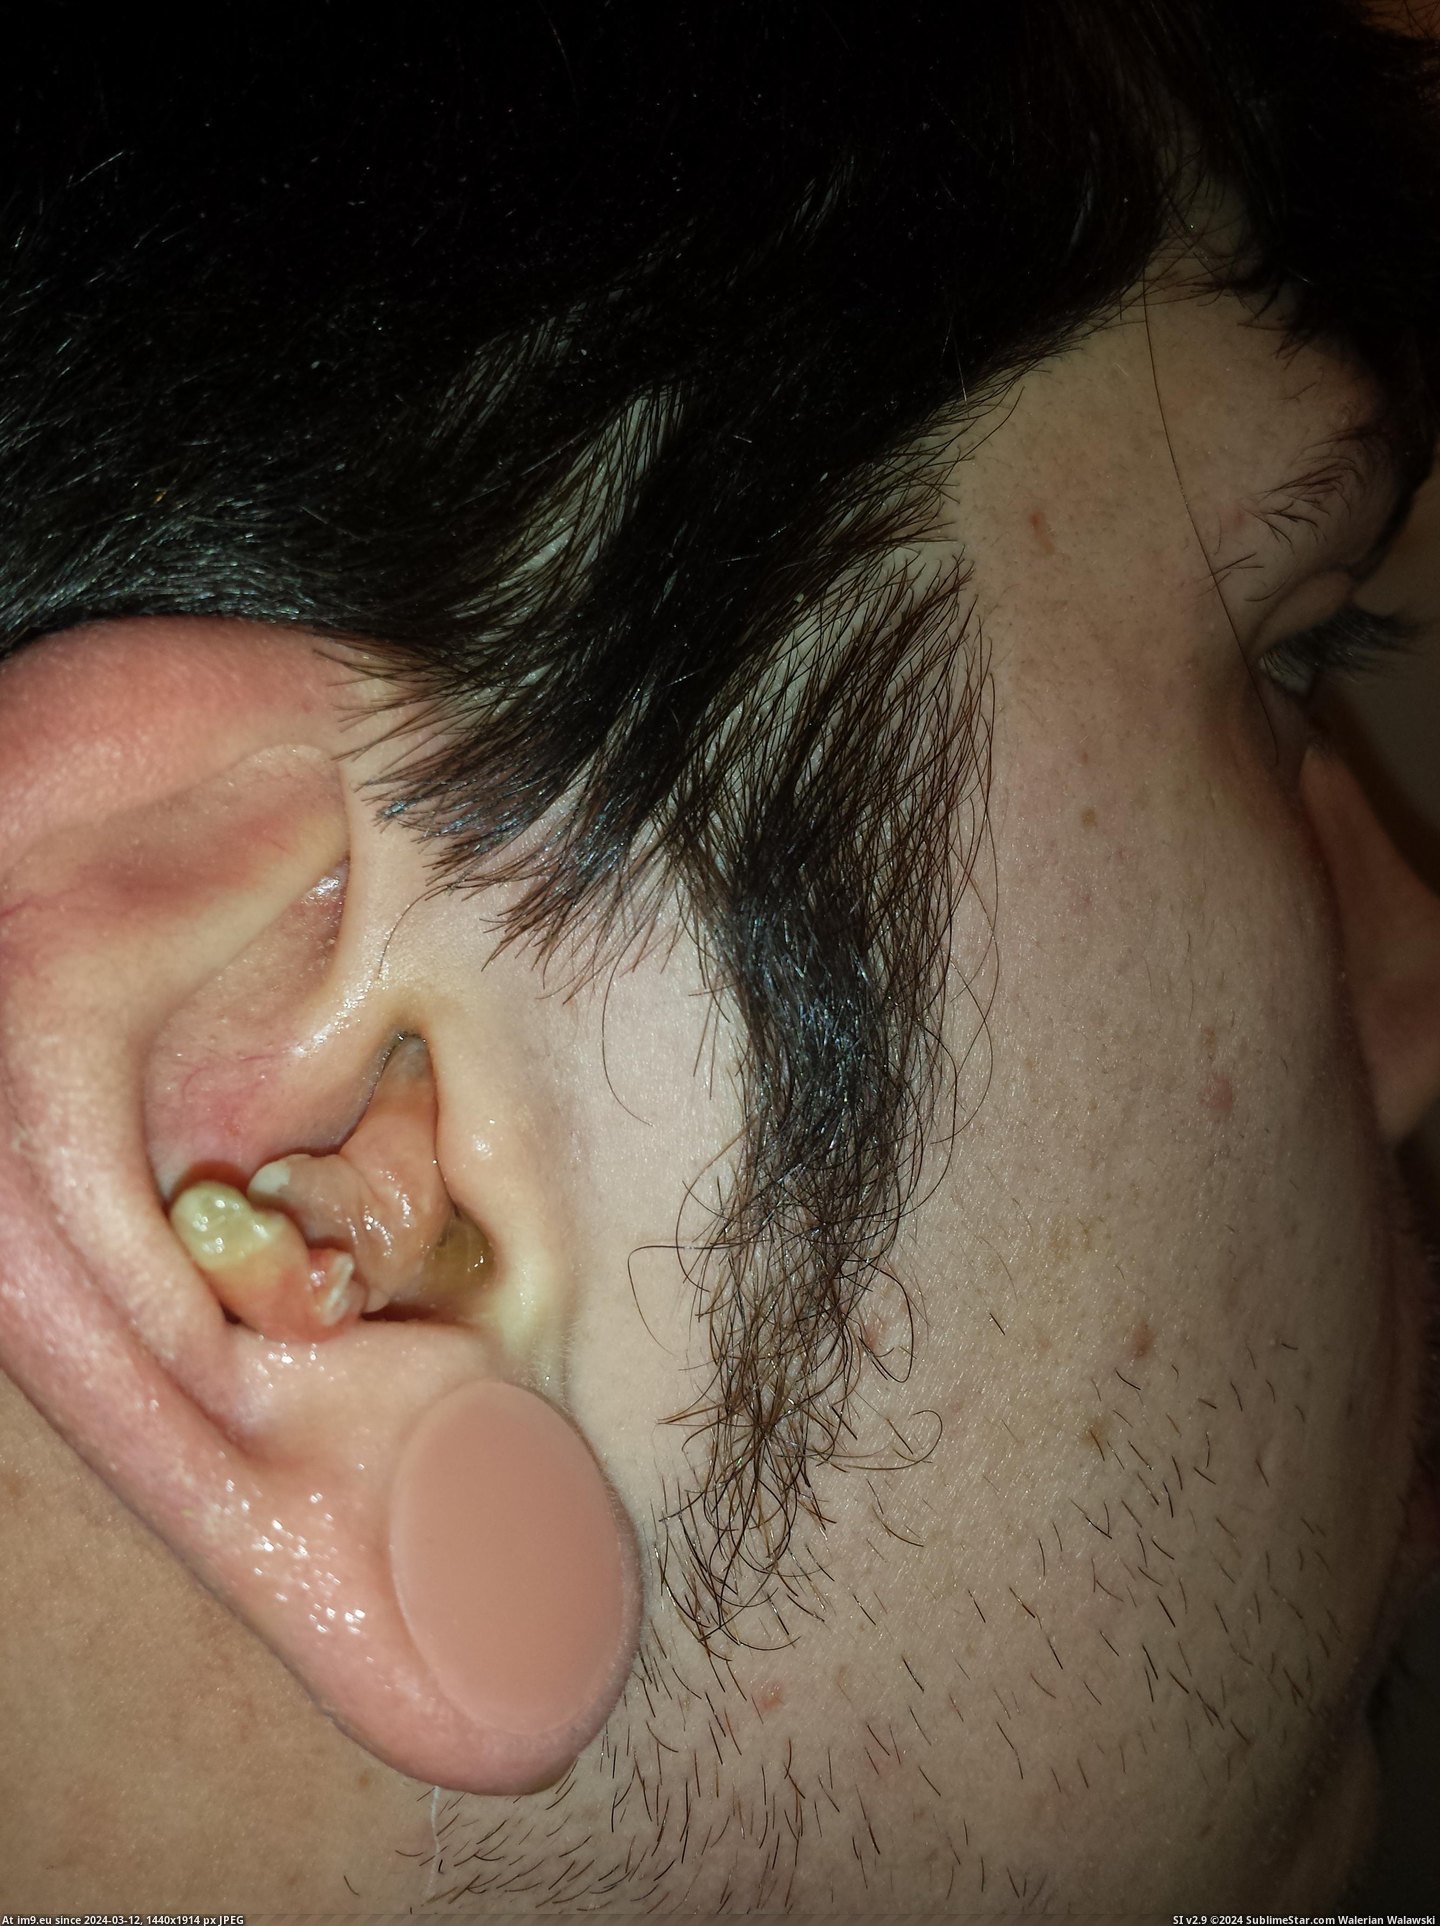 #Wtf #Ear #Infection #Crazy [Wtf] My crazy ear infection 13 Pic. (Image of album My r/WTF favs))